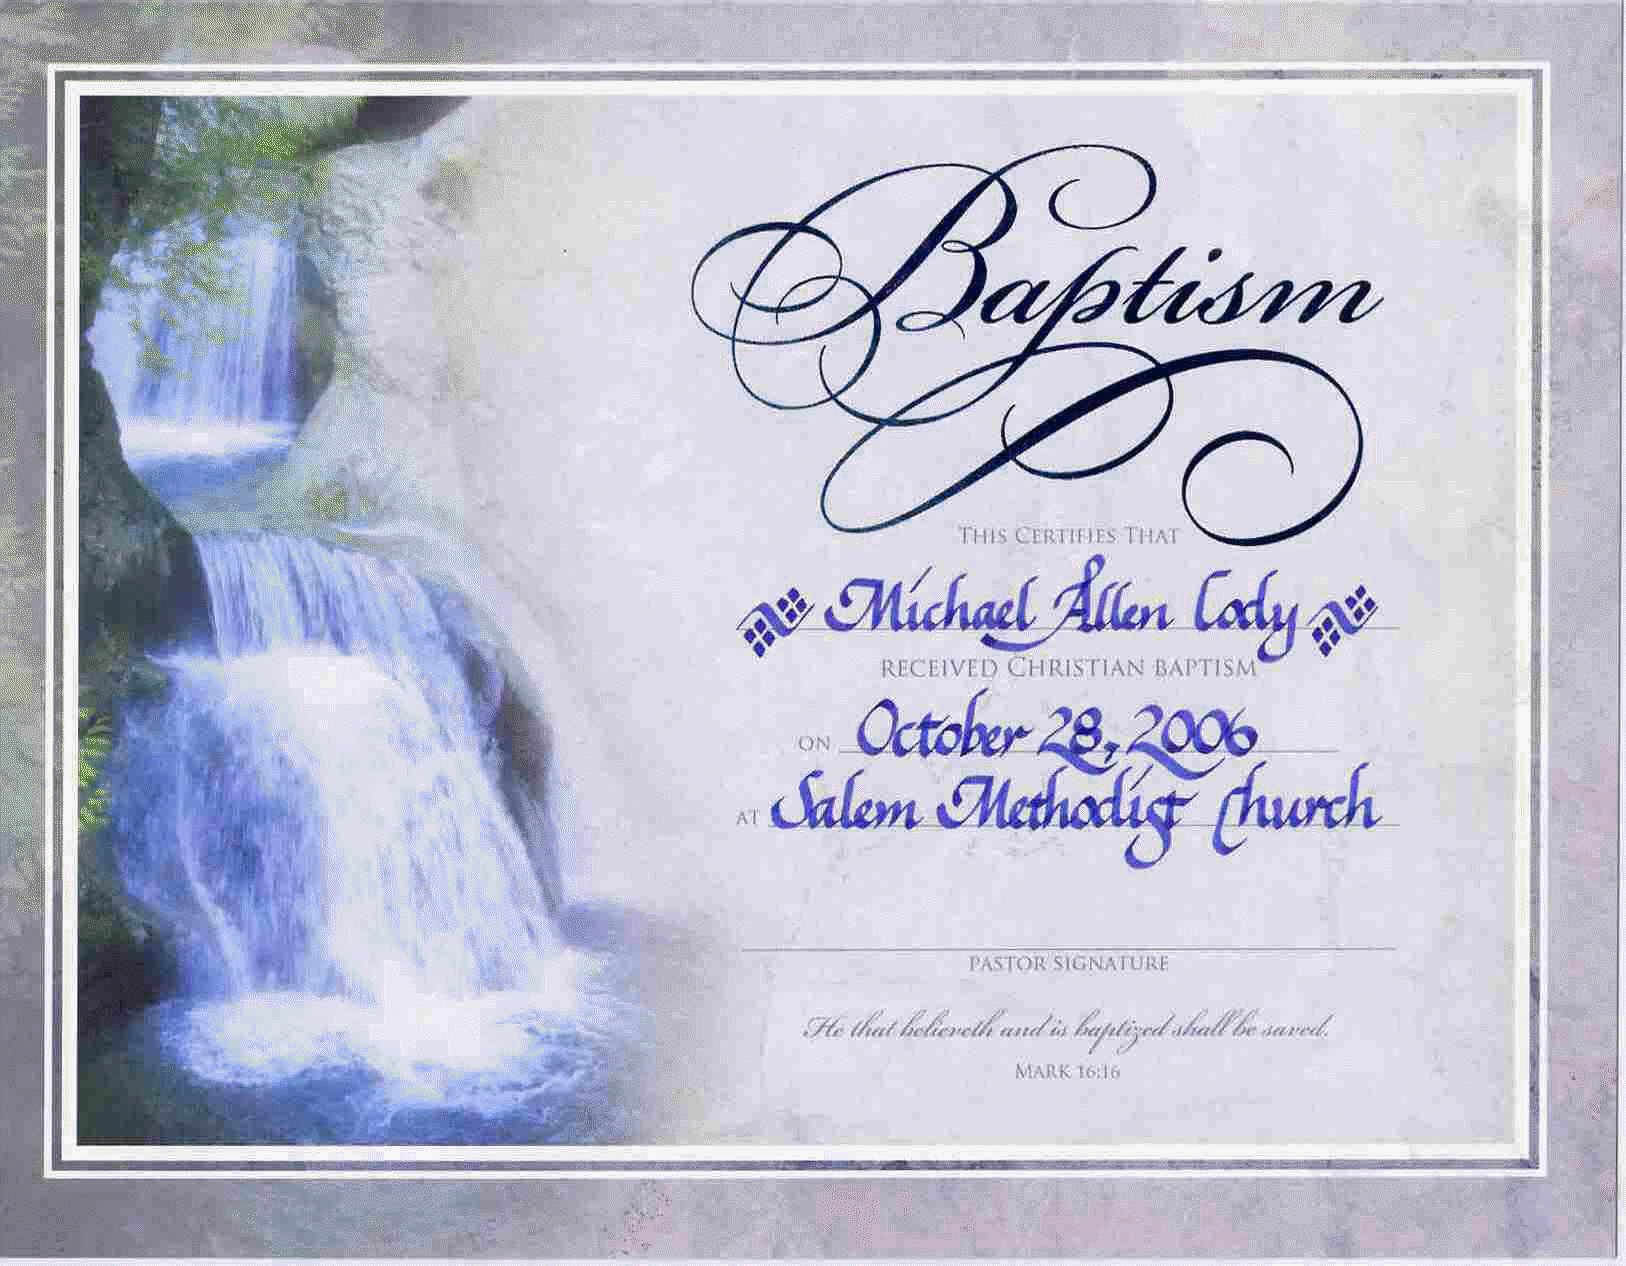 Water Baptism Certificate Templateencephaloscom Intended For Roman Catholic Baptism Certificate Template